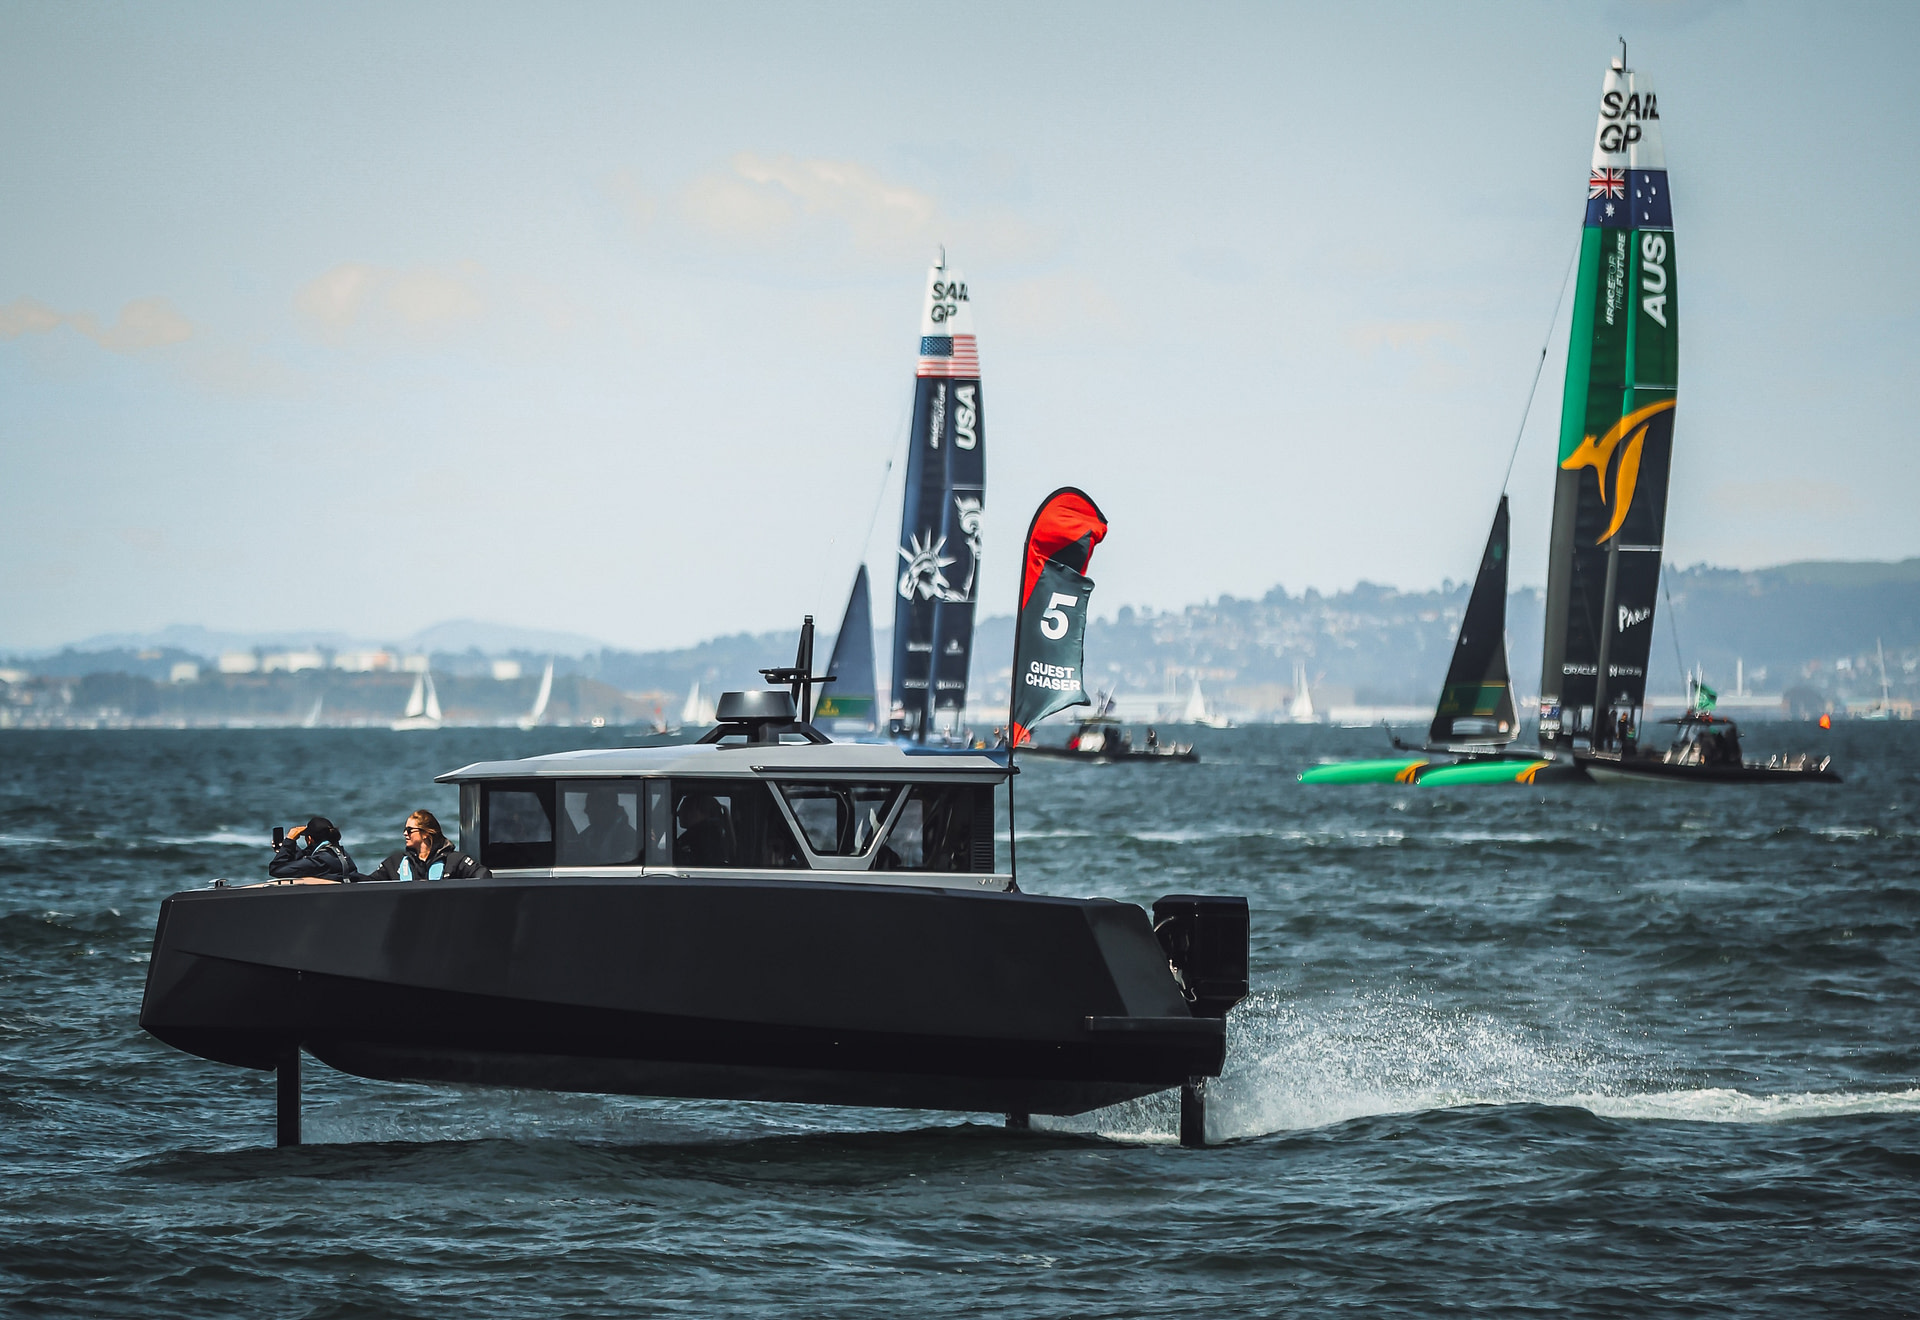 Navier’s hydrofoiling electric cruises west coast waterways to line up first pilot programs